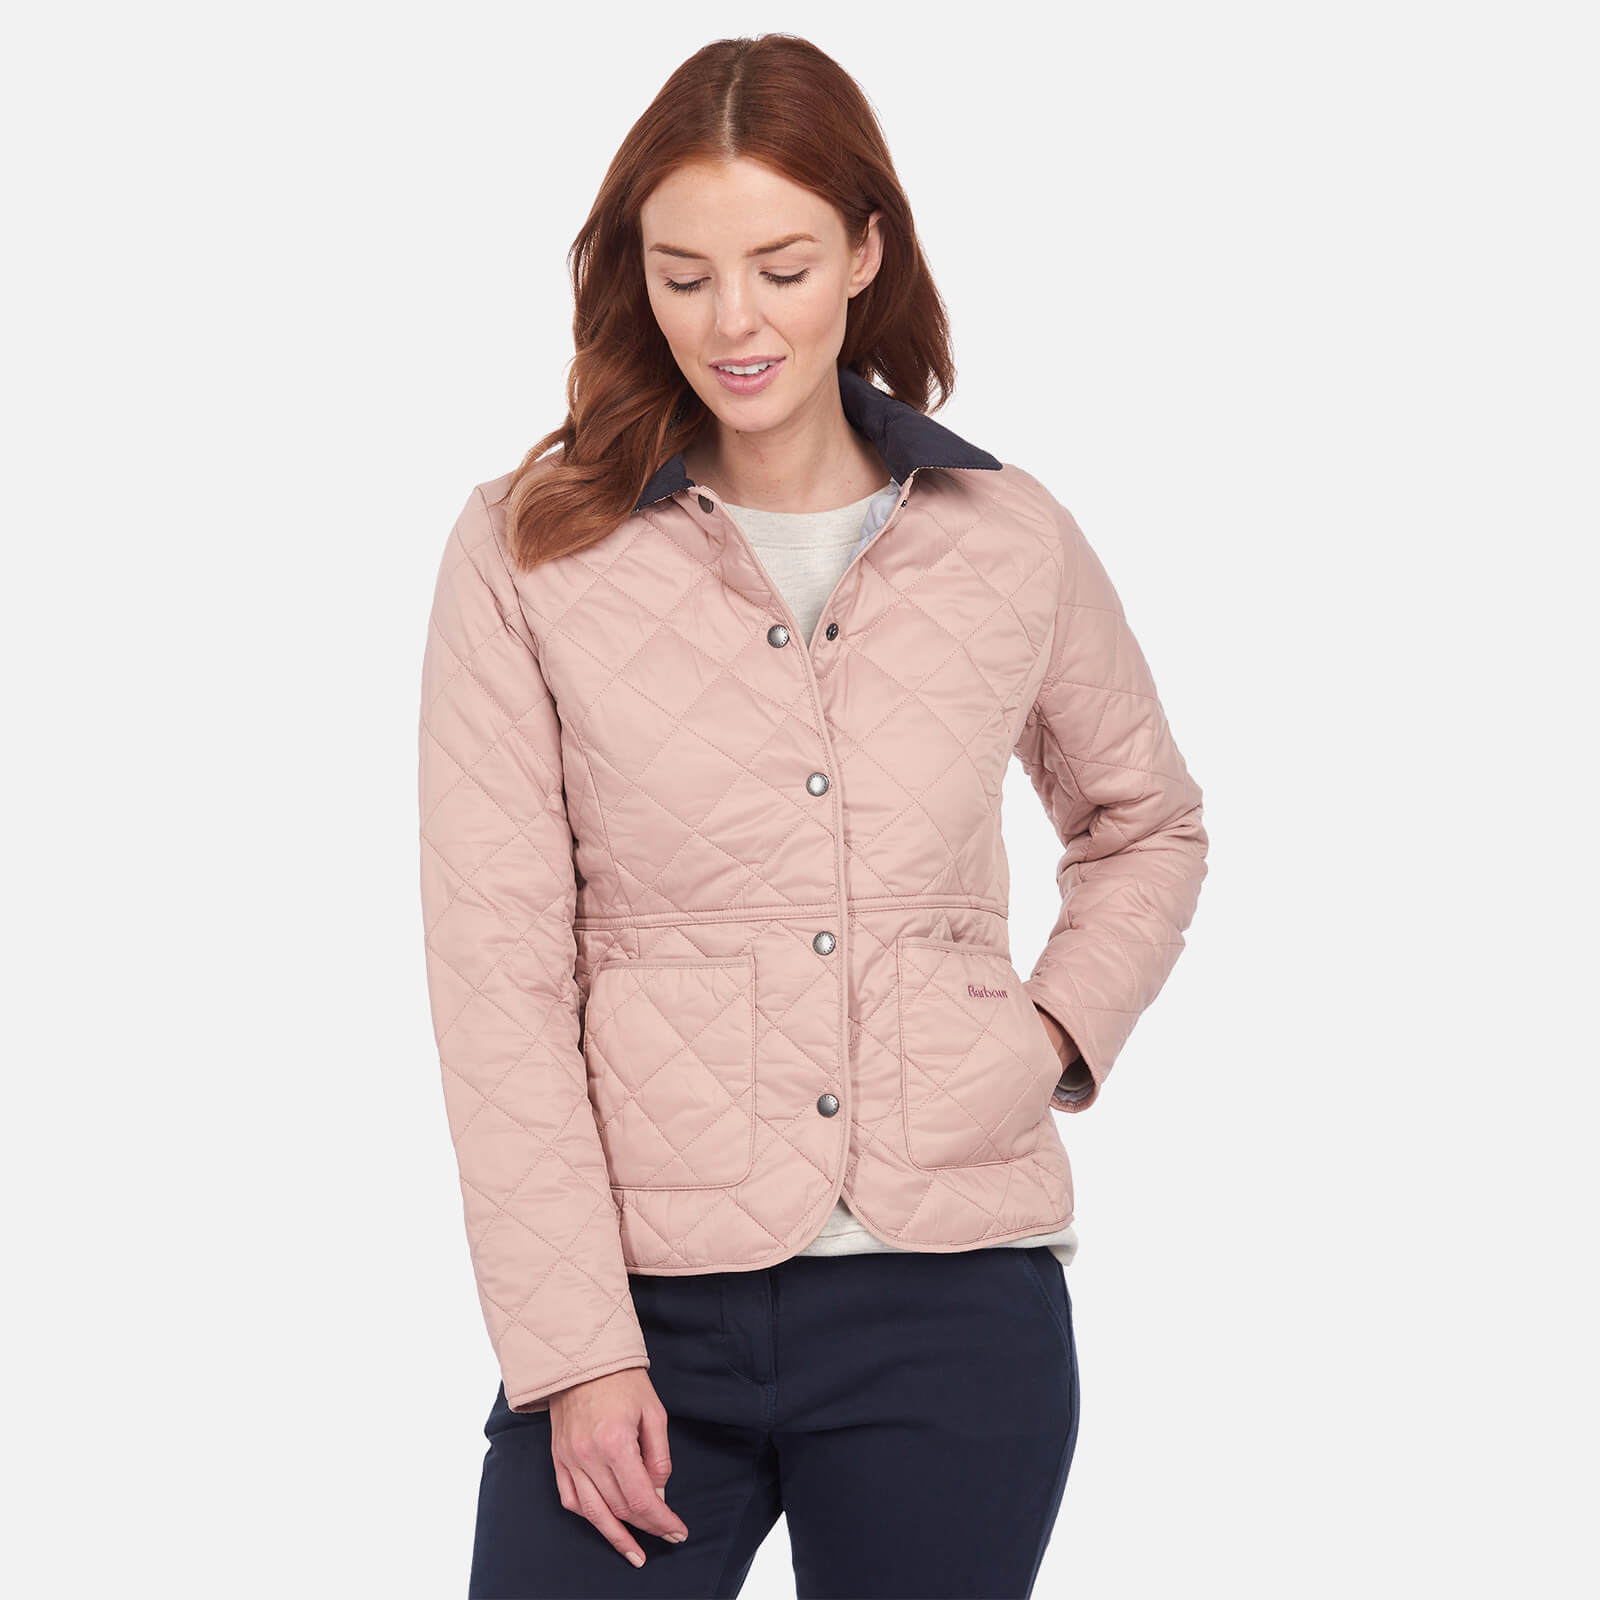 Barbour Women's Deveron Quilted Jacket - Pale Pink - UK 14